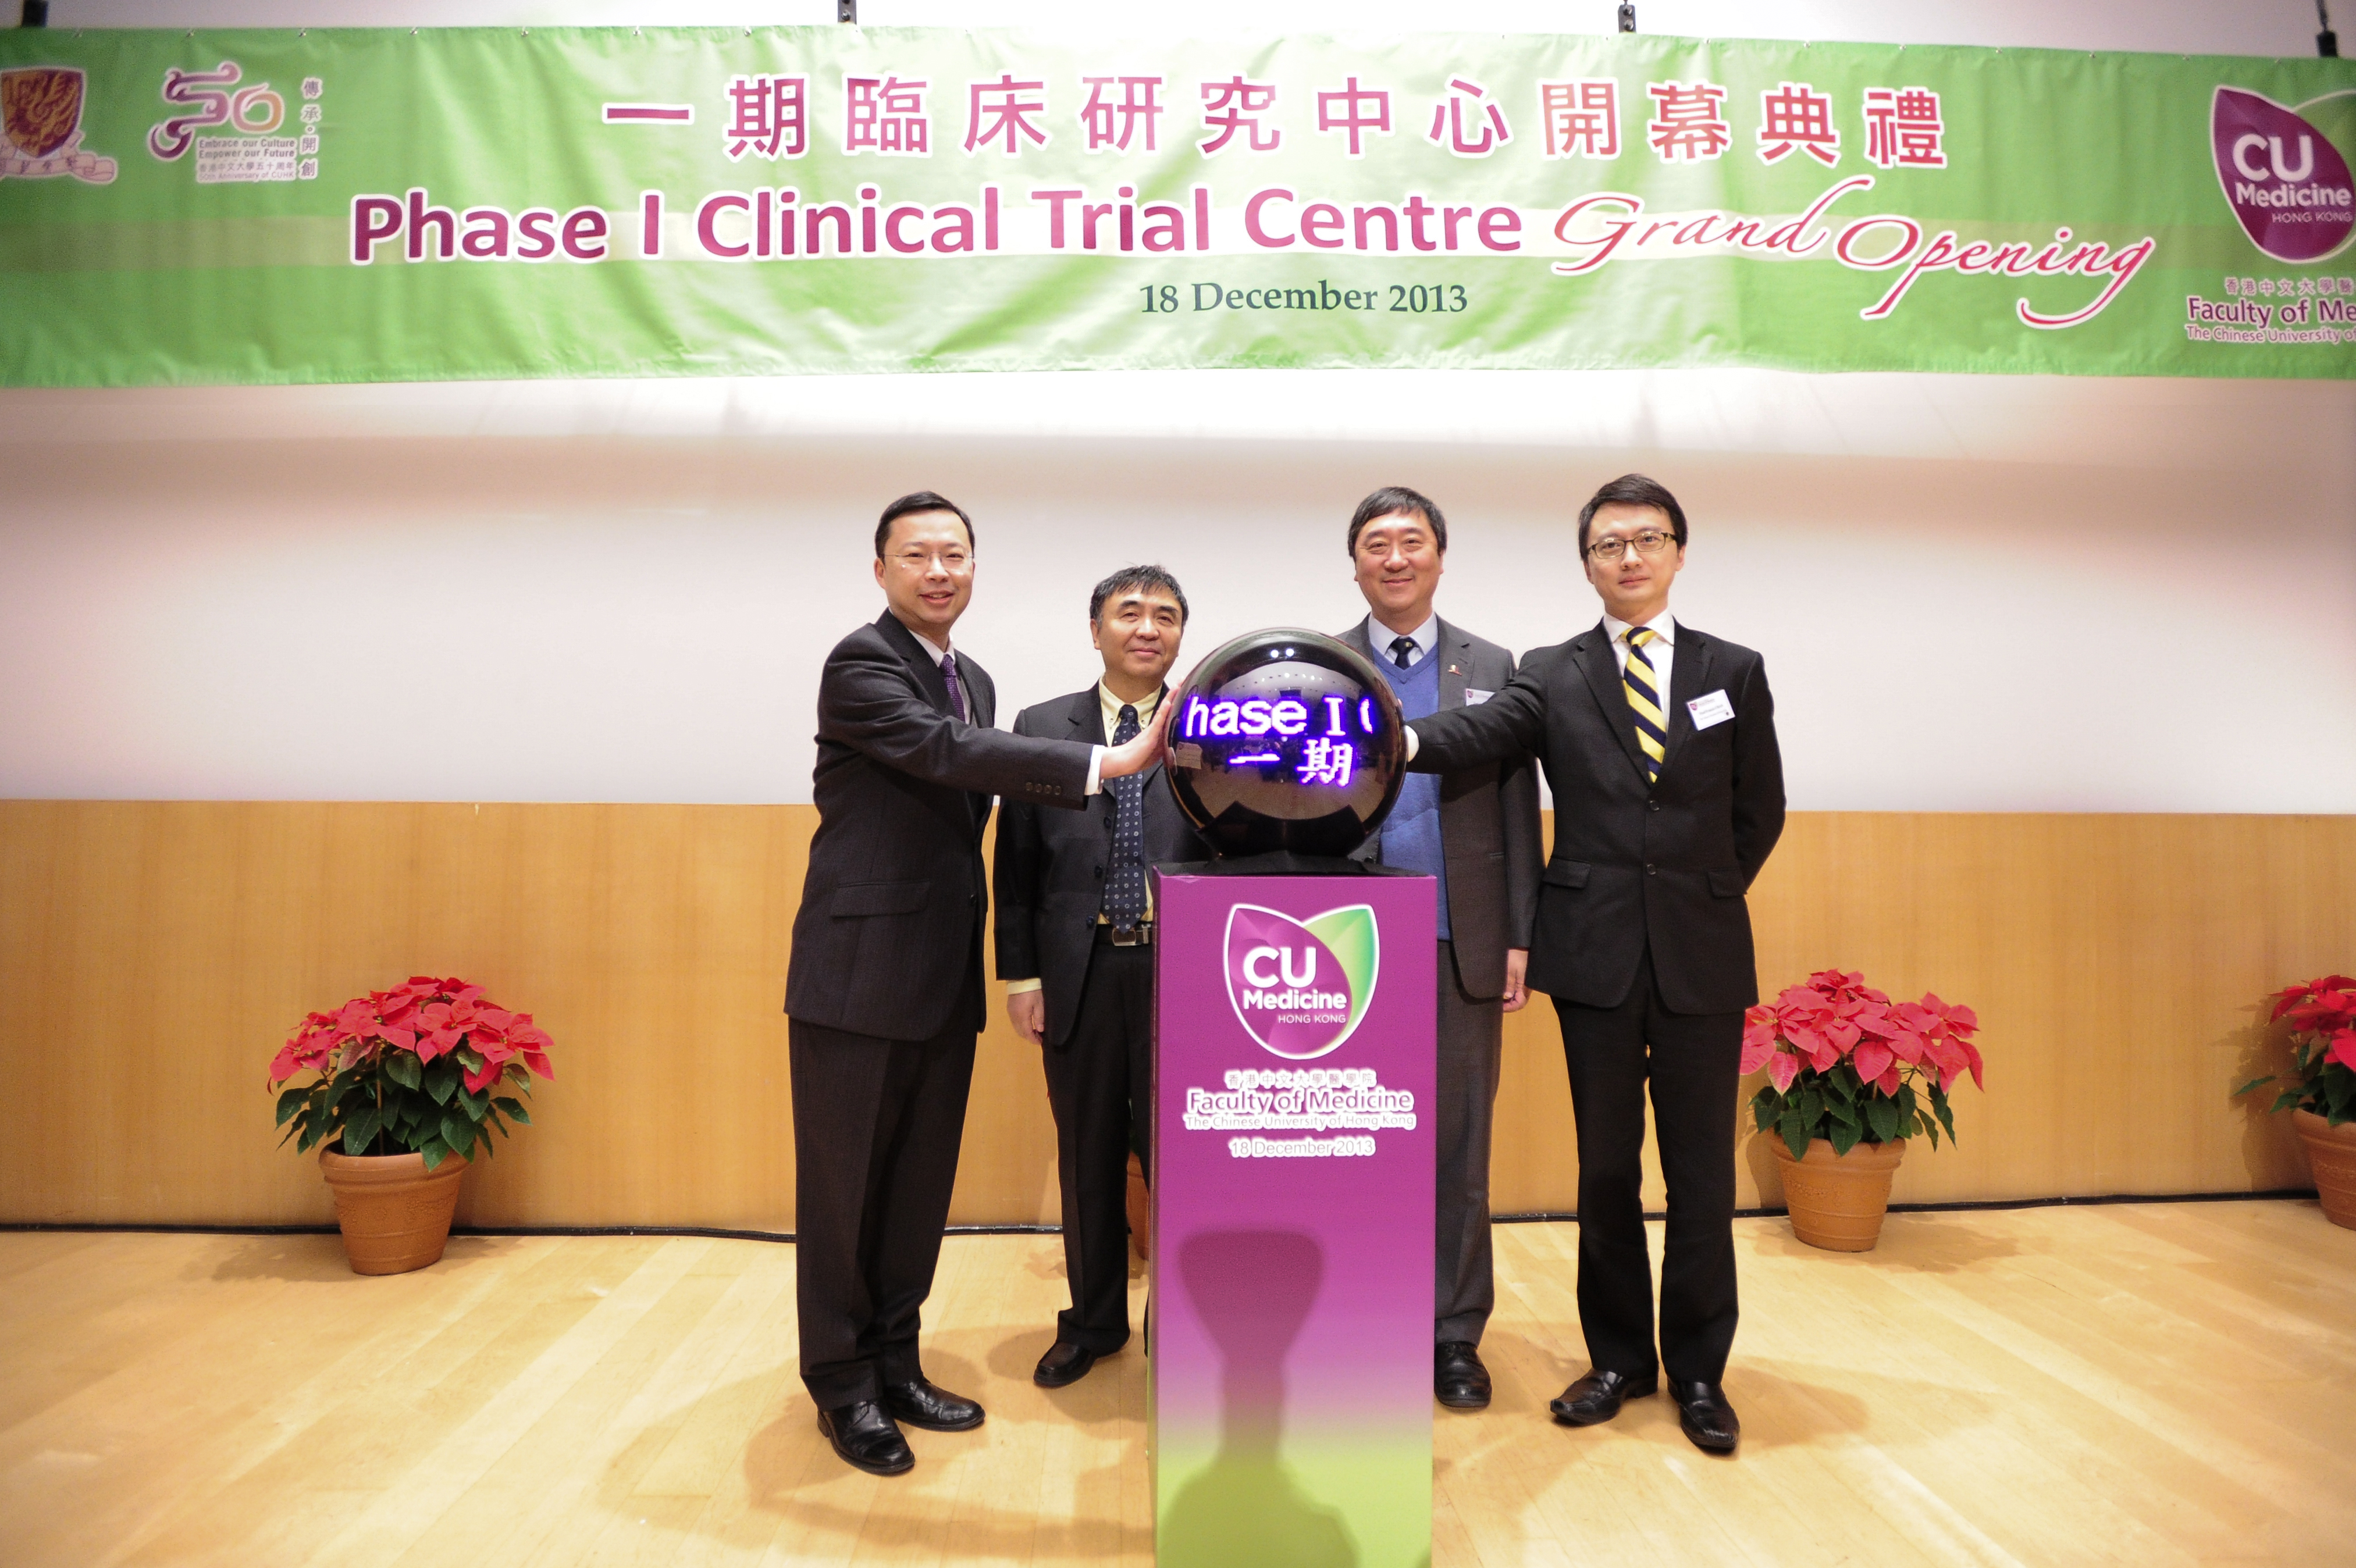 (From left) Prof. Anthony T.C. Chan, Chief Director, Phase I Clinical Trial Centre, CUHK; Prof. Jiang Ji, Director, Phase I Unit, Clinical Pharmacology Research Center, Peking Union Medical College Hospital; Prof. Joseph J.Y. Sung, Vice-Chancellor and President, CUHK; and Prof. Francis K.L. Chan, Dean, Faculty of Medicine, CUHK officiate at the Grand Opening of CUHK Phase I Clinical Trial Centre.